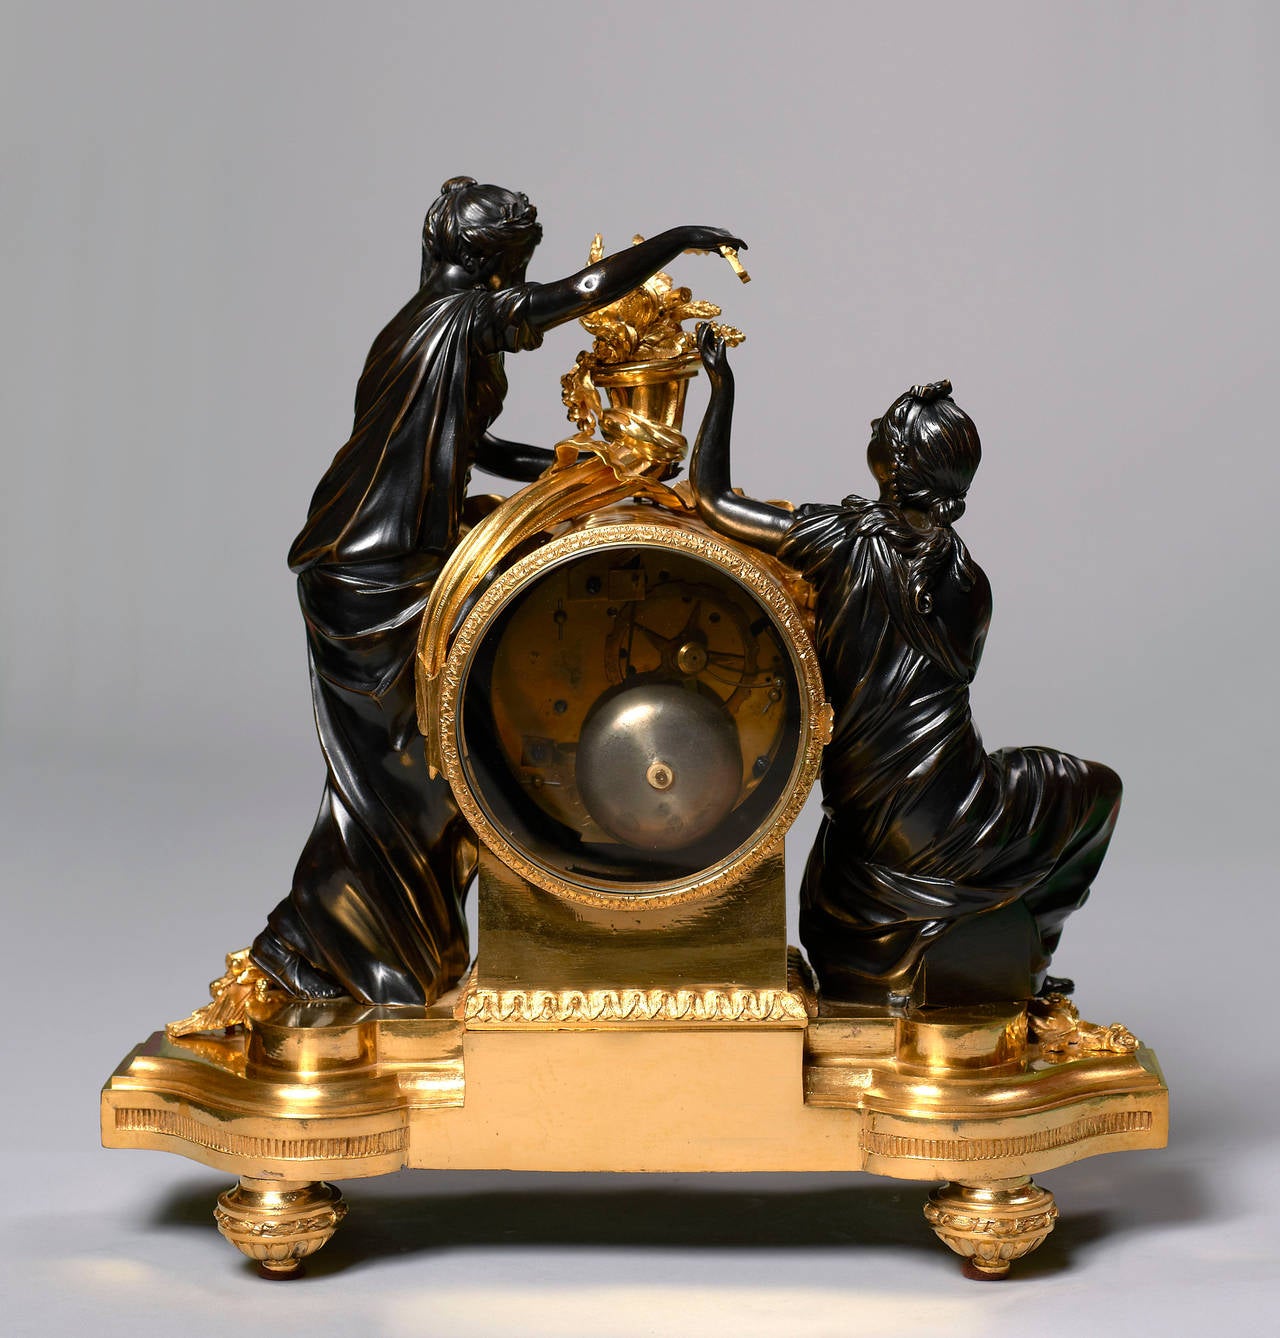 Late 18th Century Chased and Patinated Gilt Bronze Louis XVI Clock by Louis Montjoye